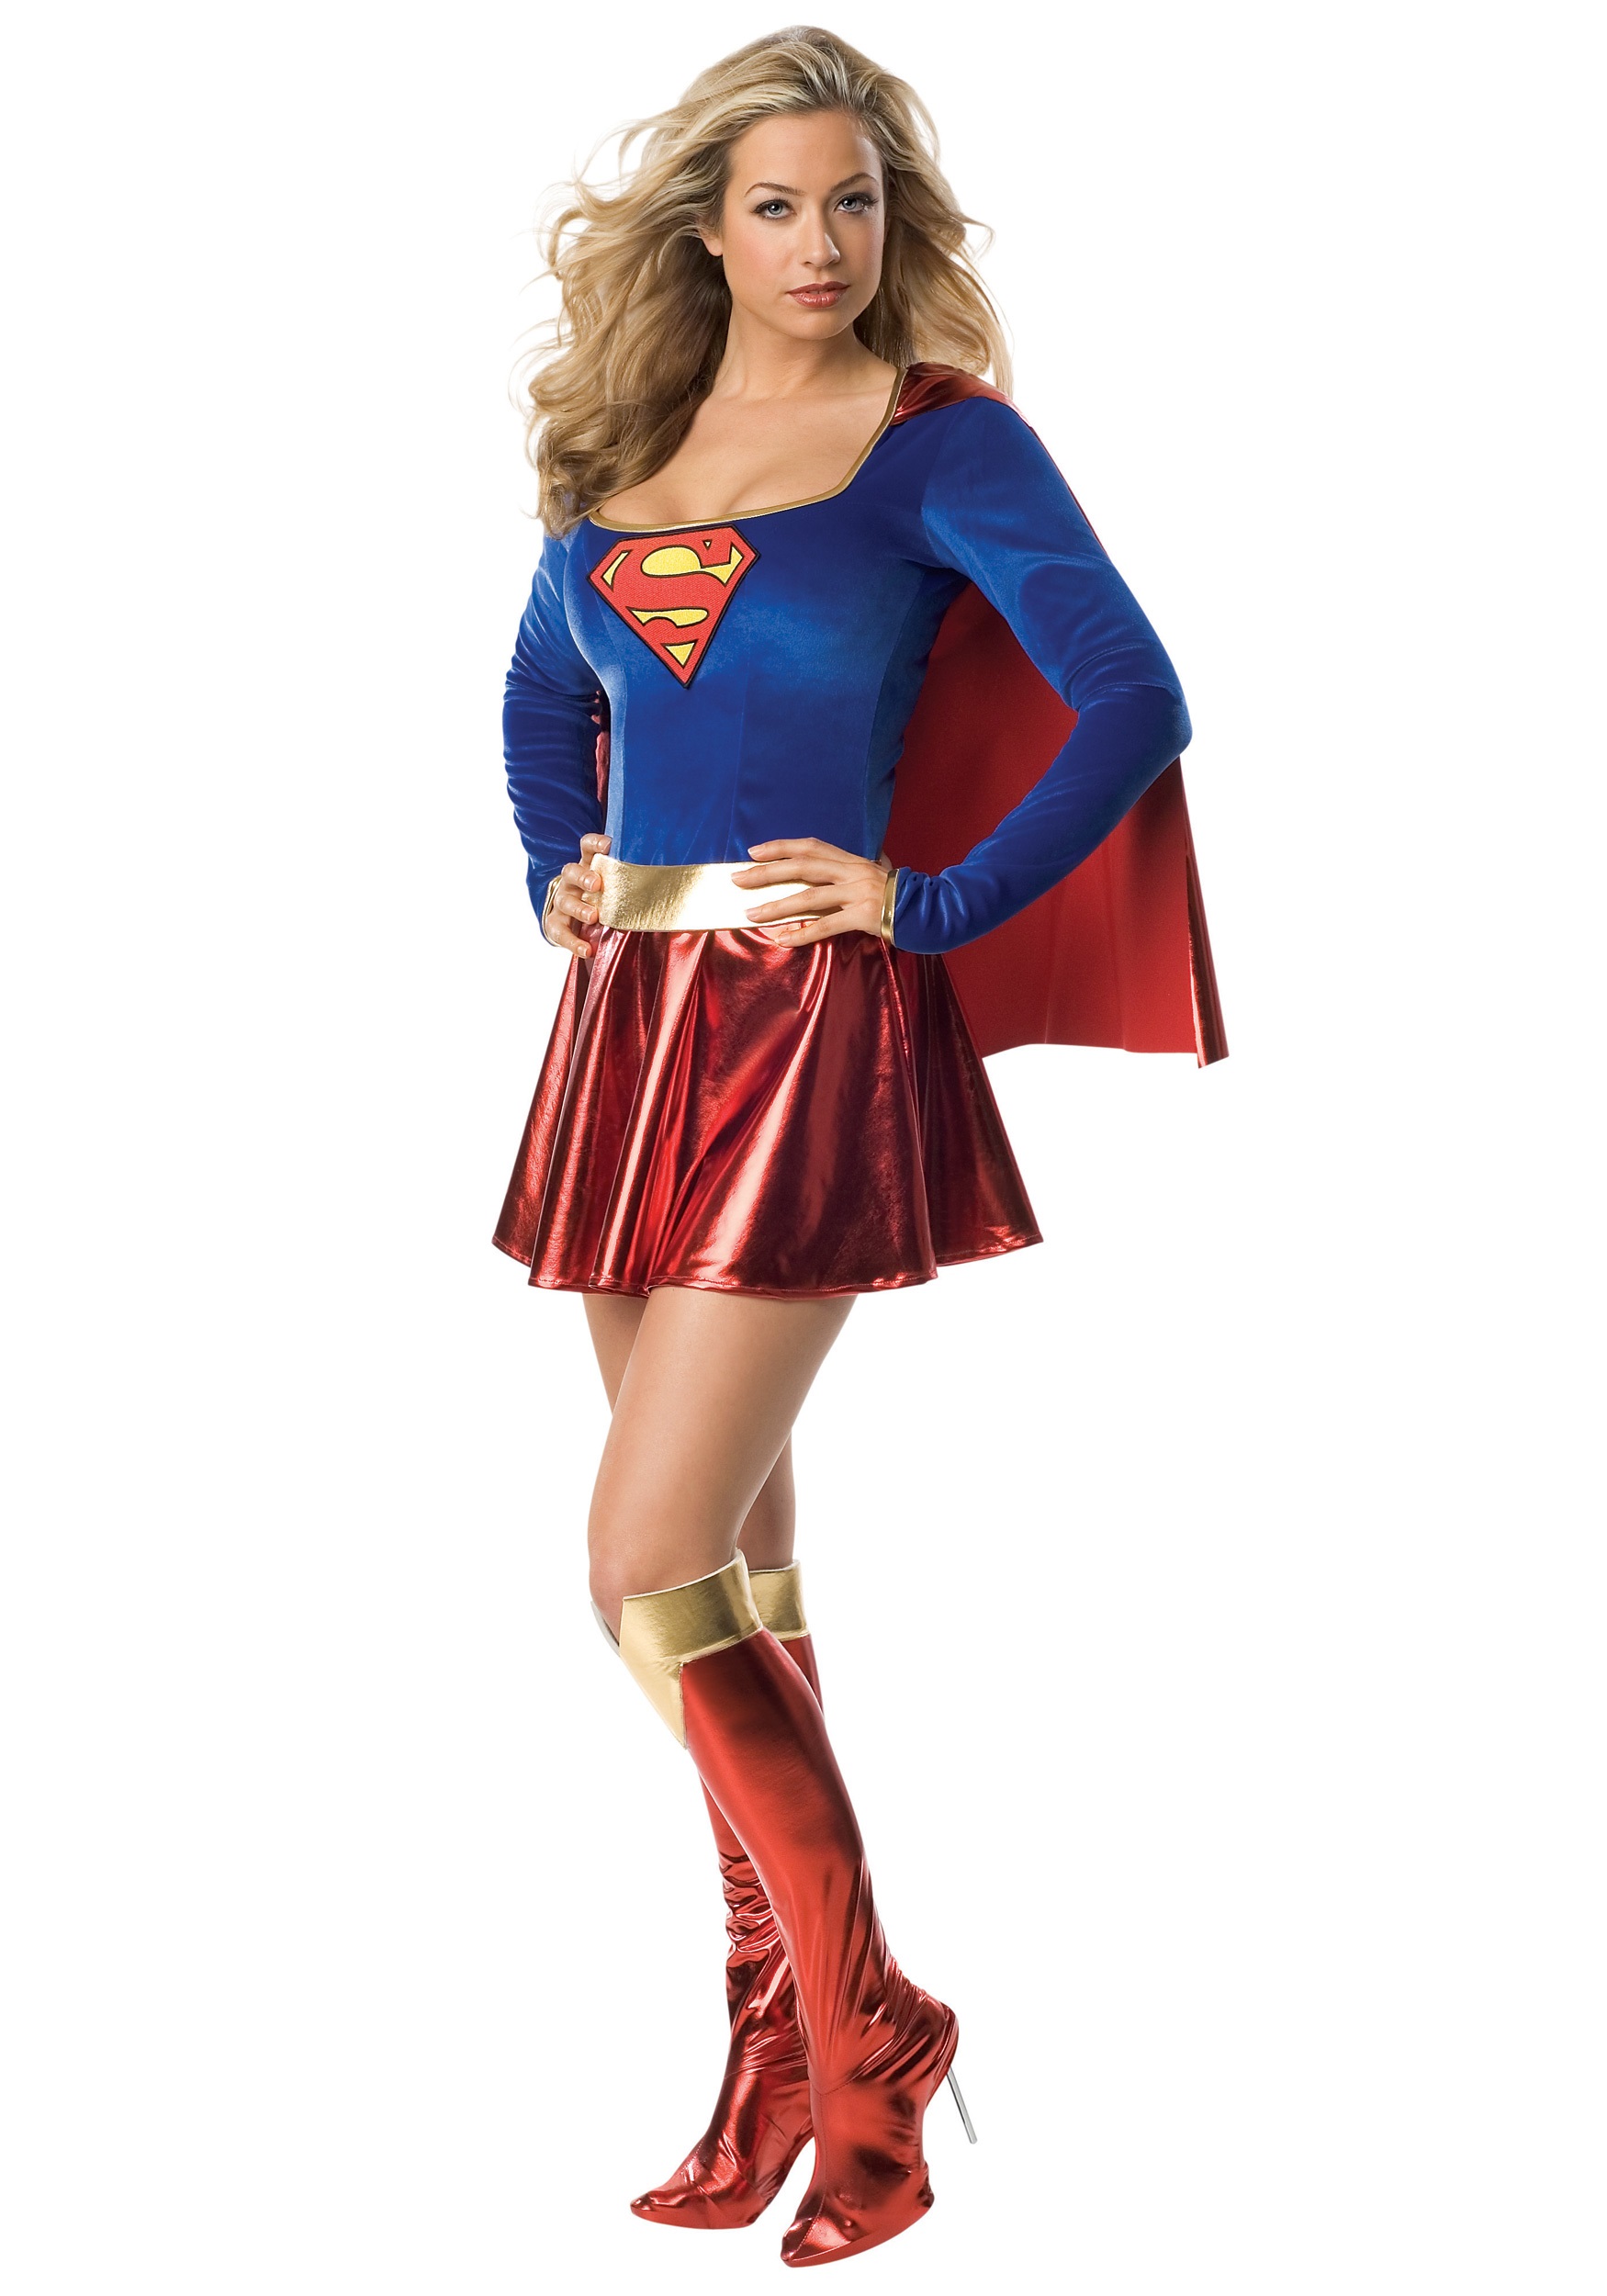 Download this Women Sexy Supergirl Costume picture